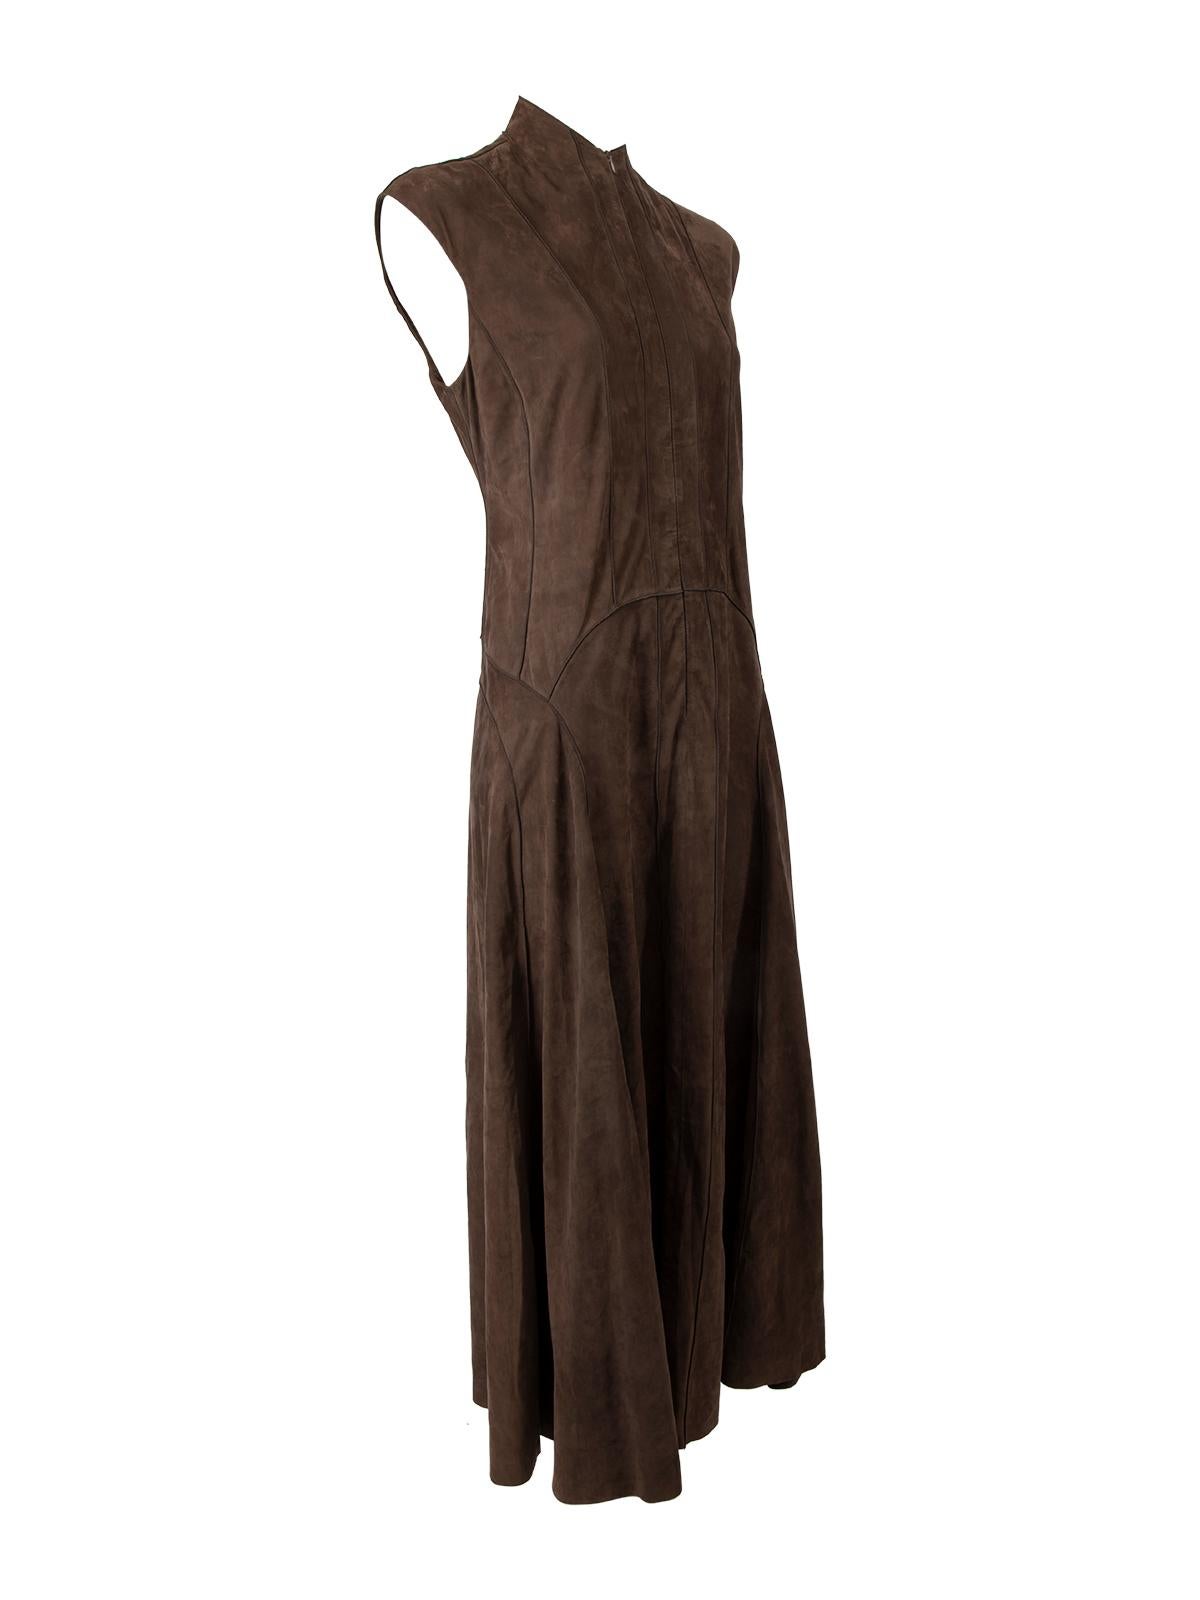 CONDITION is Very good. Minimal wear to dress is evident. Minimal wear to the outer suded fabric which looks a little worn, and has some fading/scuff on this used Calvin Klein designer resale item. Details Brown Suede leather Dress Sleeveless Round